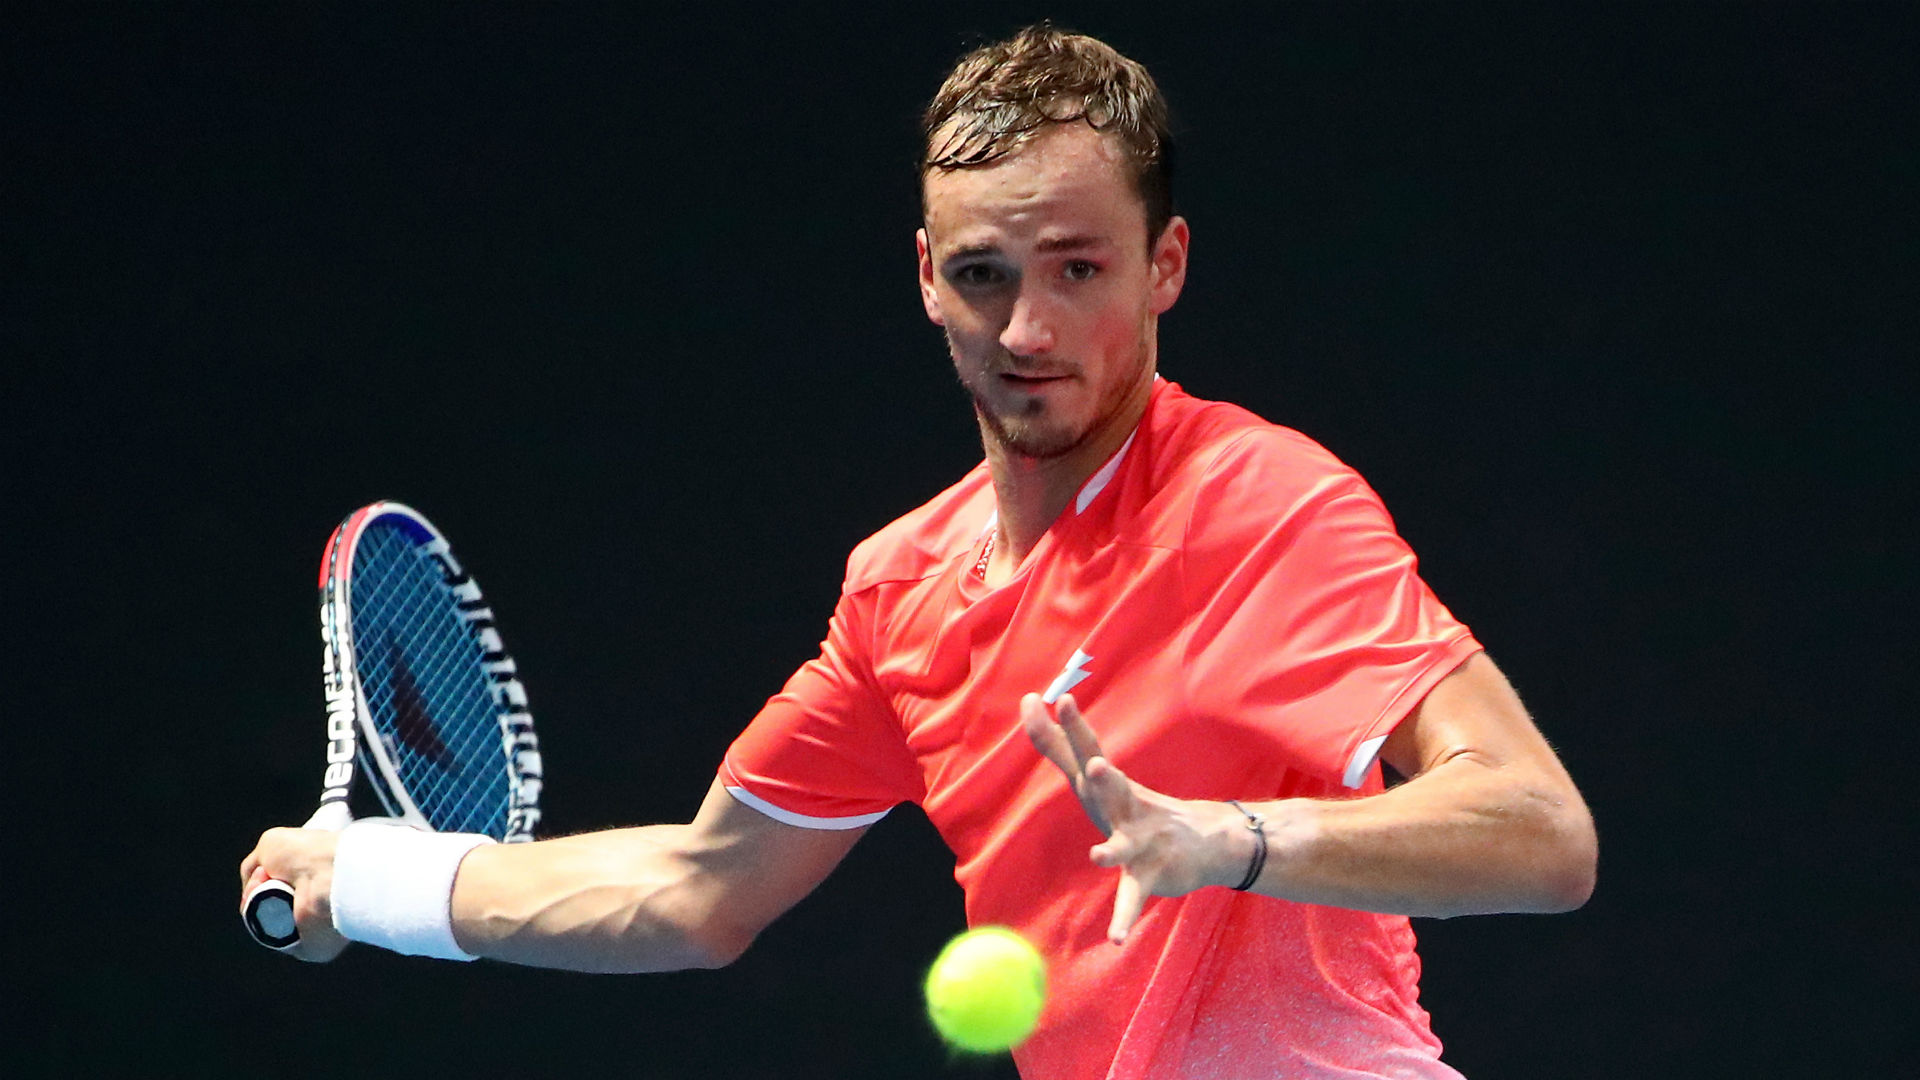 Daniil Medvedev and Jo-Wilfried Tsonga continued their winning runs and will now meet in Rotterdam after setting up a last-eight encounter.